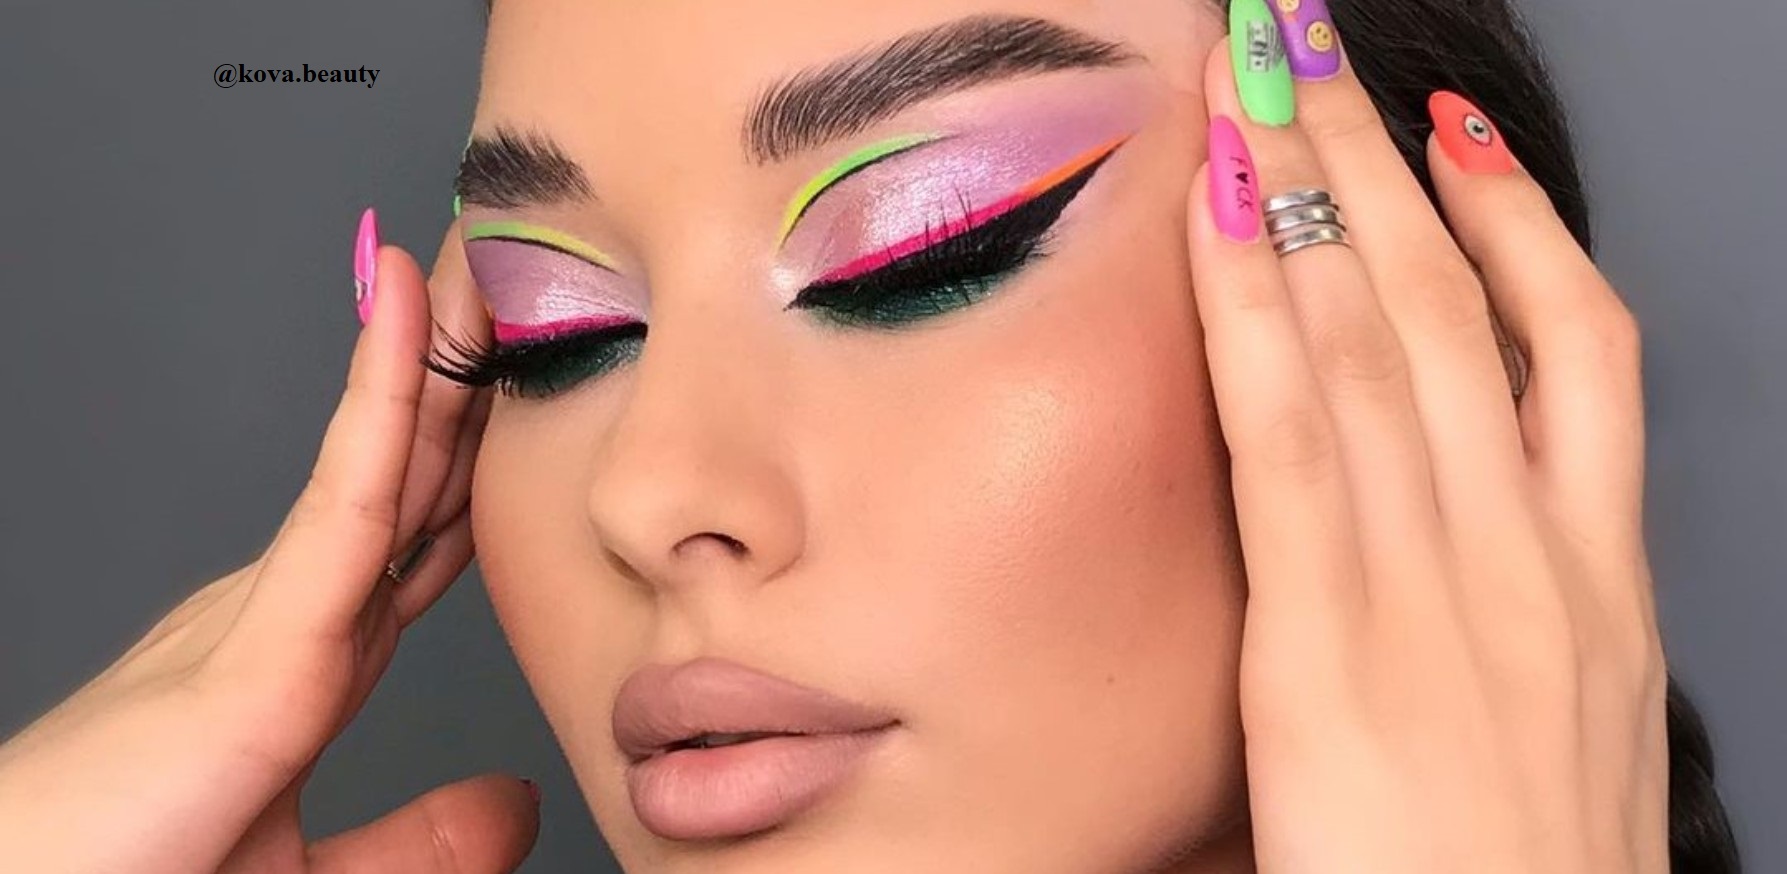 The Unicorn-Inspired Makeup That Will Have You Turning Heads